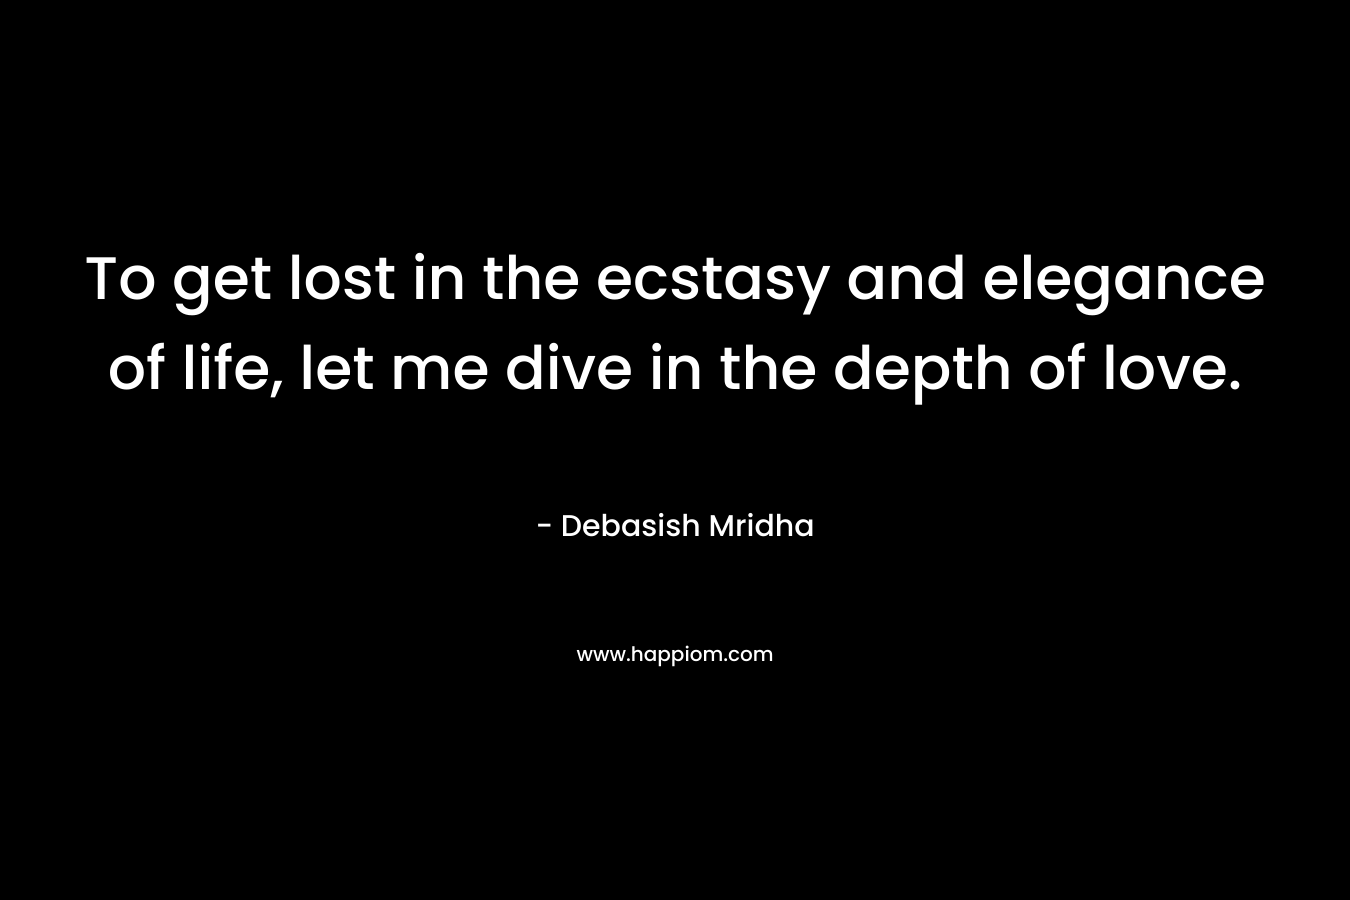 To get lost in the ecstasy and elegance of life, let me dive in the depth of love. – Debasish Mridha